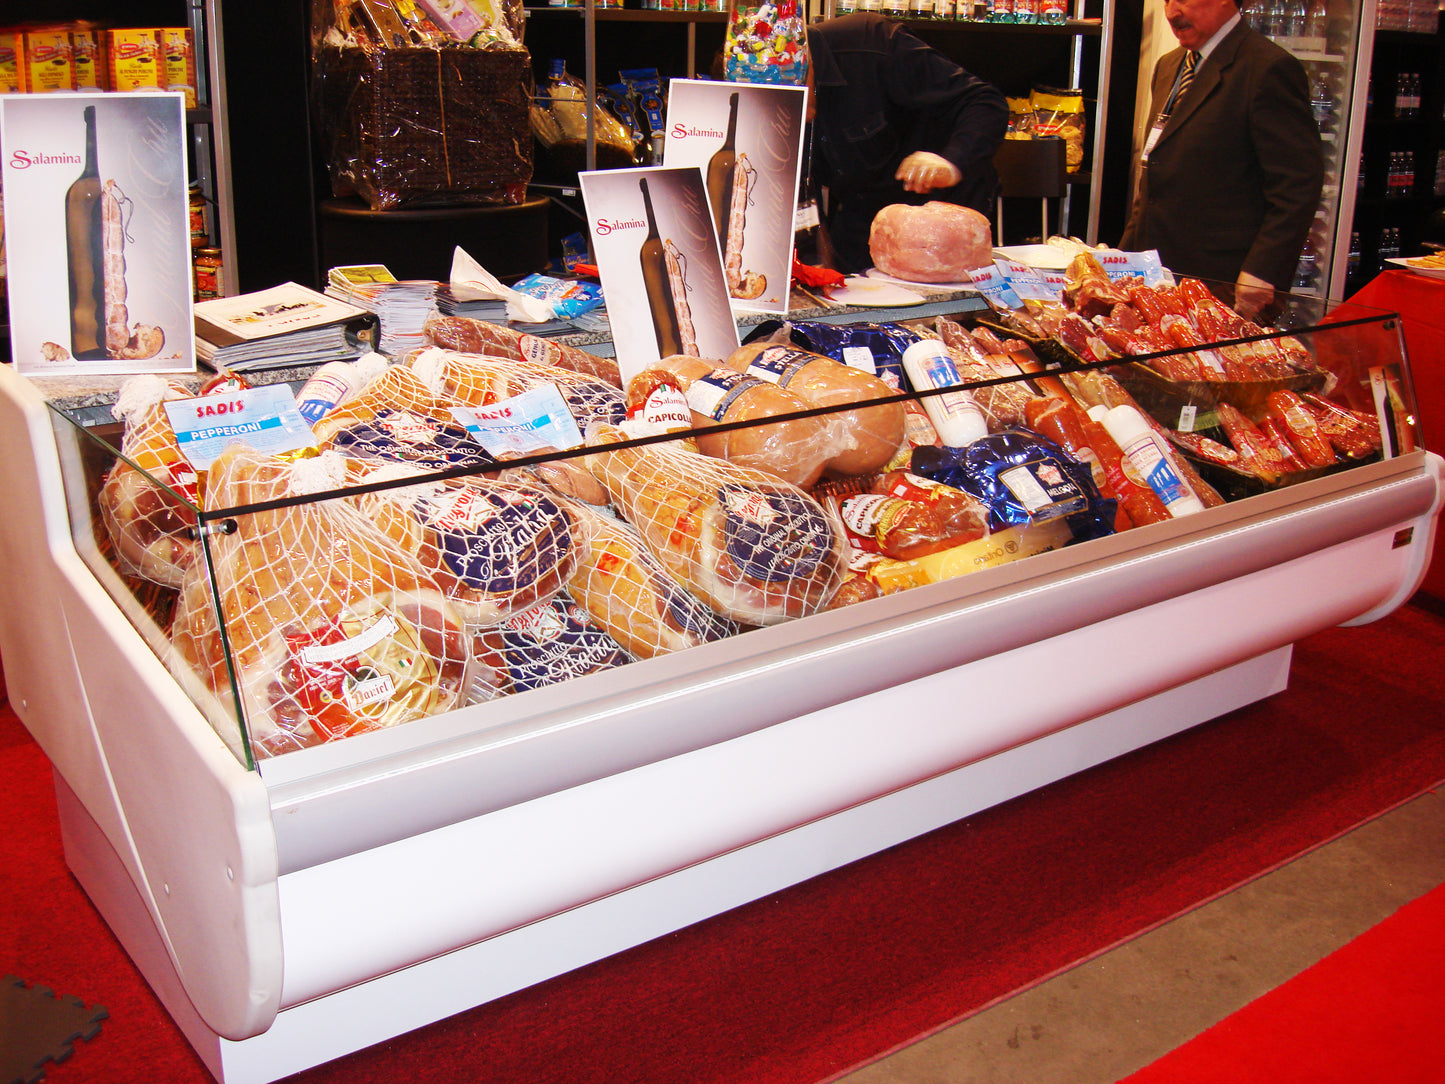 33"D Self-served Refrigerated Case